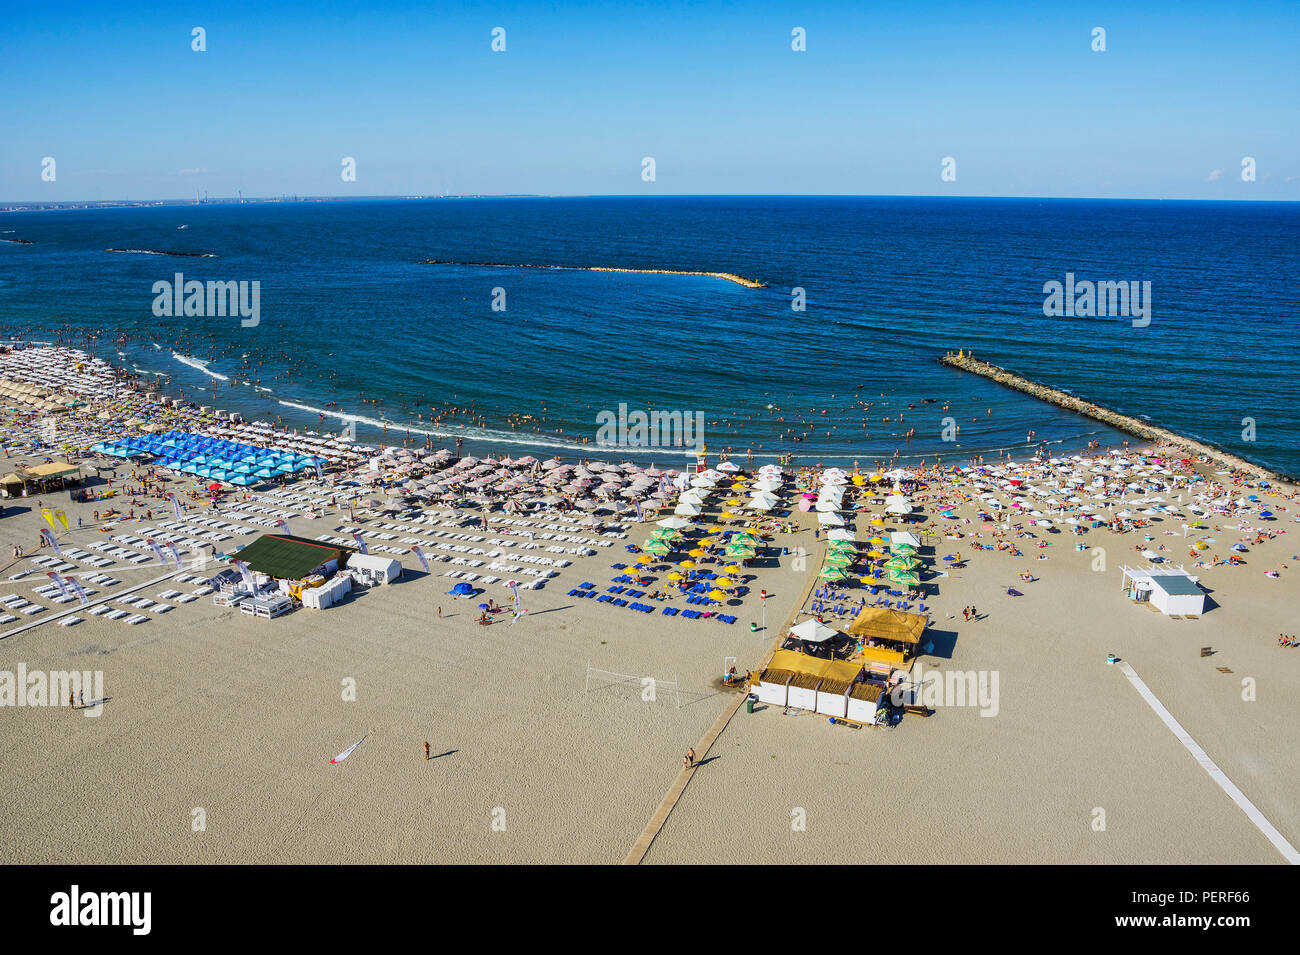 MAMAIA, CONSTANTA , ROMANIA - AUGUST, 2018. Mamaia beach on the Black sea coast - view from Sky View Park Hotel, top summer attraction in Romania. Stock Photo